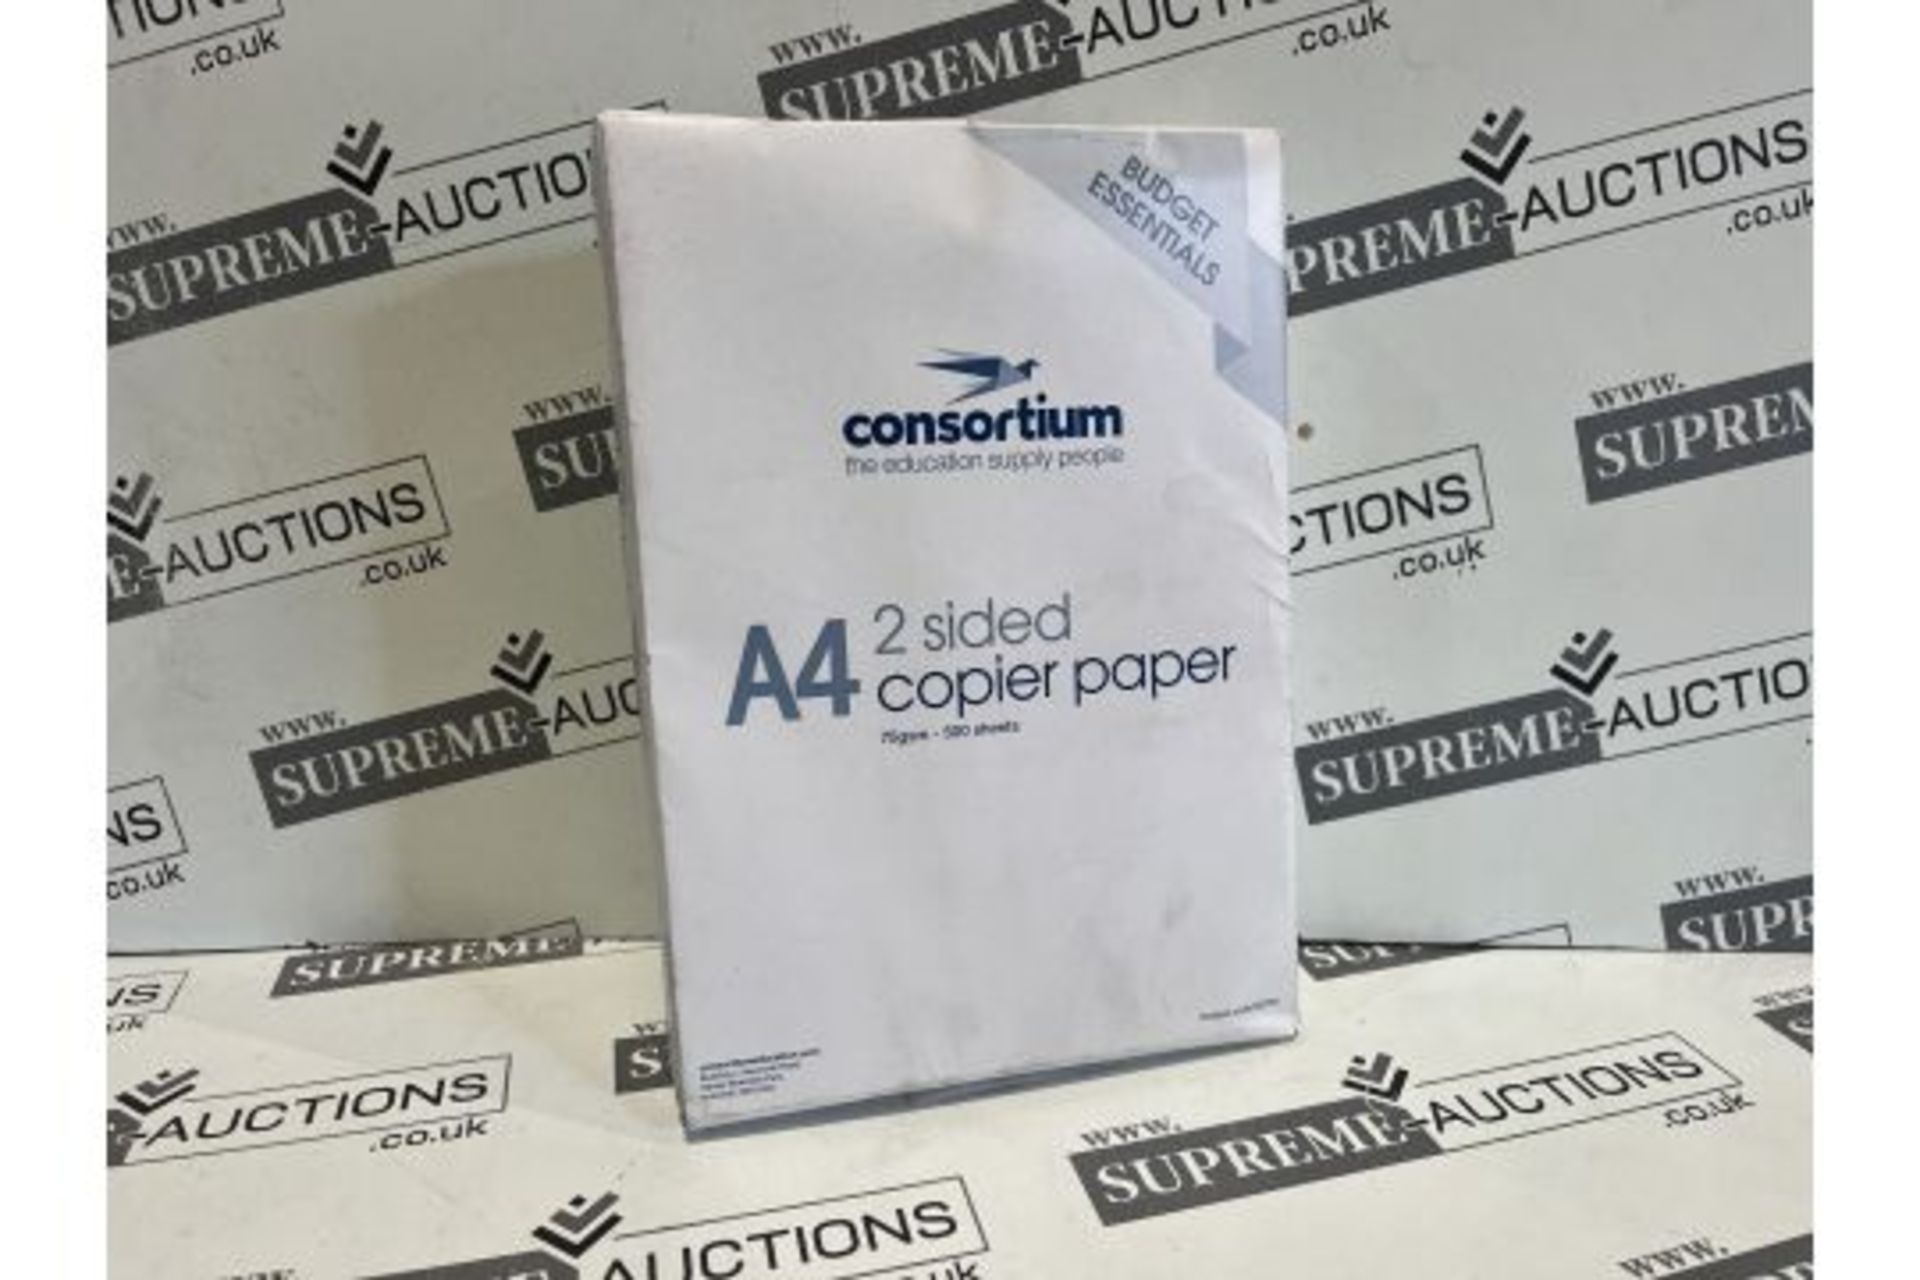 TRADE LOT 10 X BRAND NE PACKS OF 5 REAMS OF 500 SHEETS 75GSM COPIER PAPER 17.6/9.3